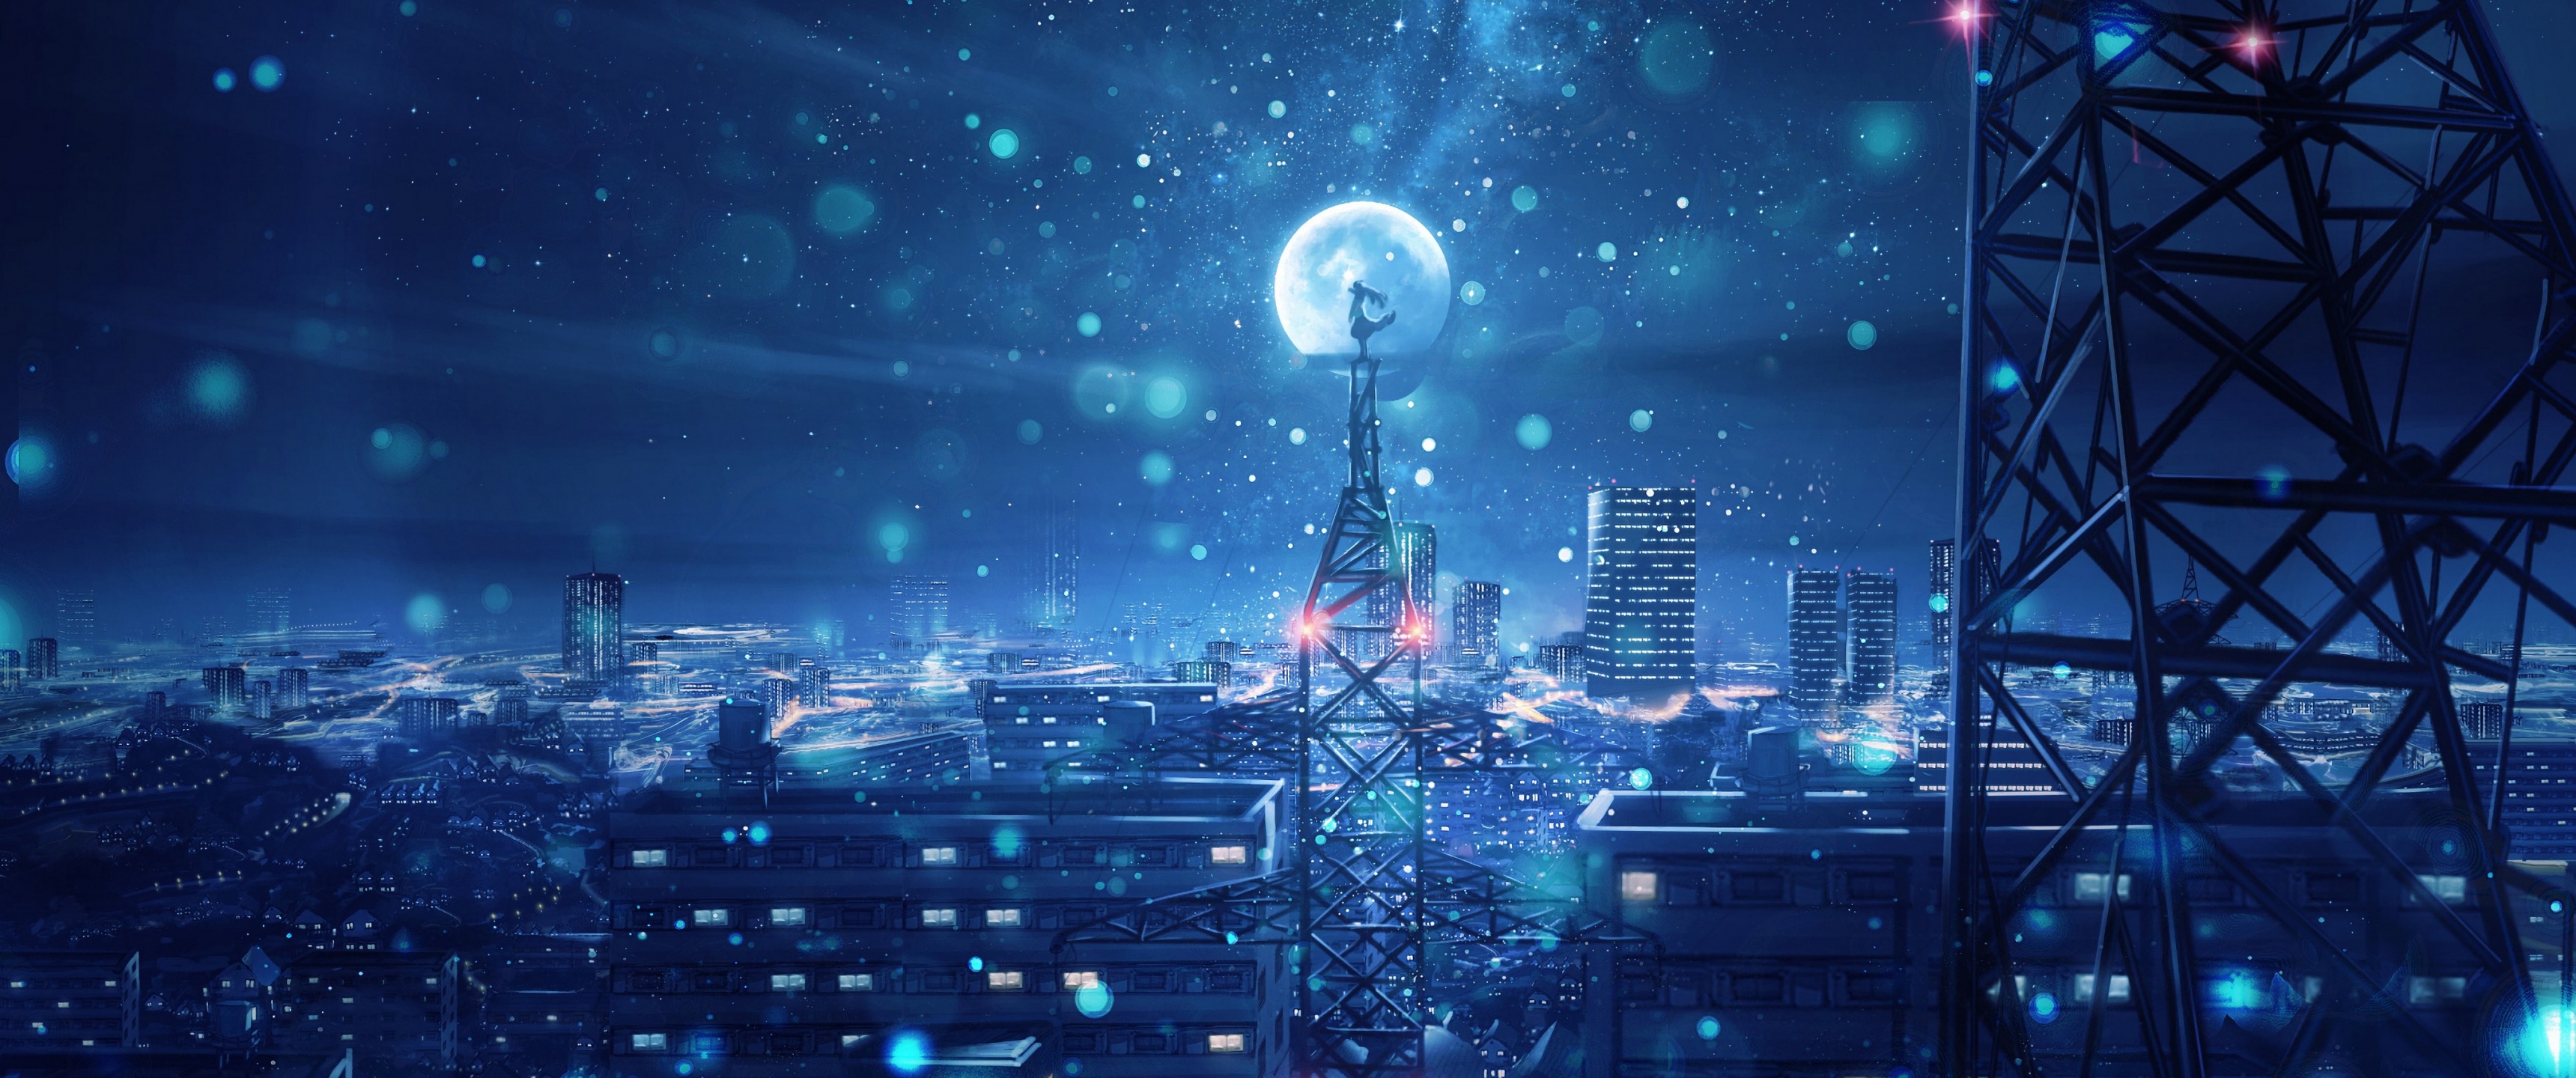 Download Night Time Aesthetic Anime Scenery Wallpaper